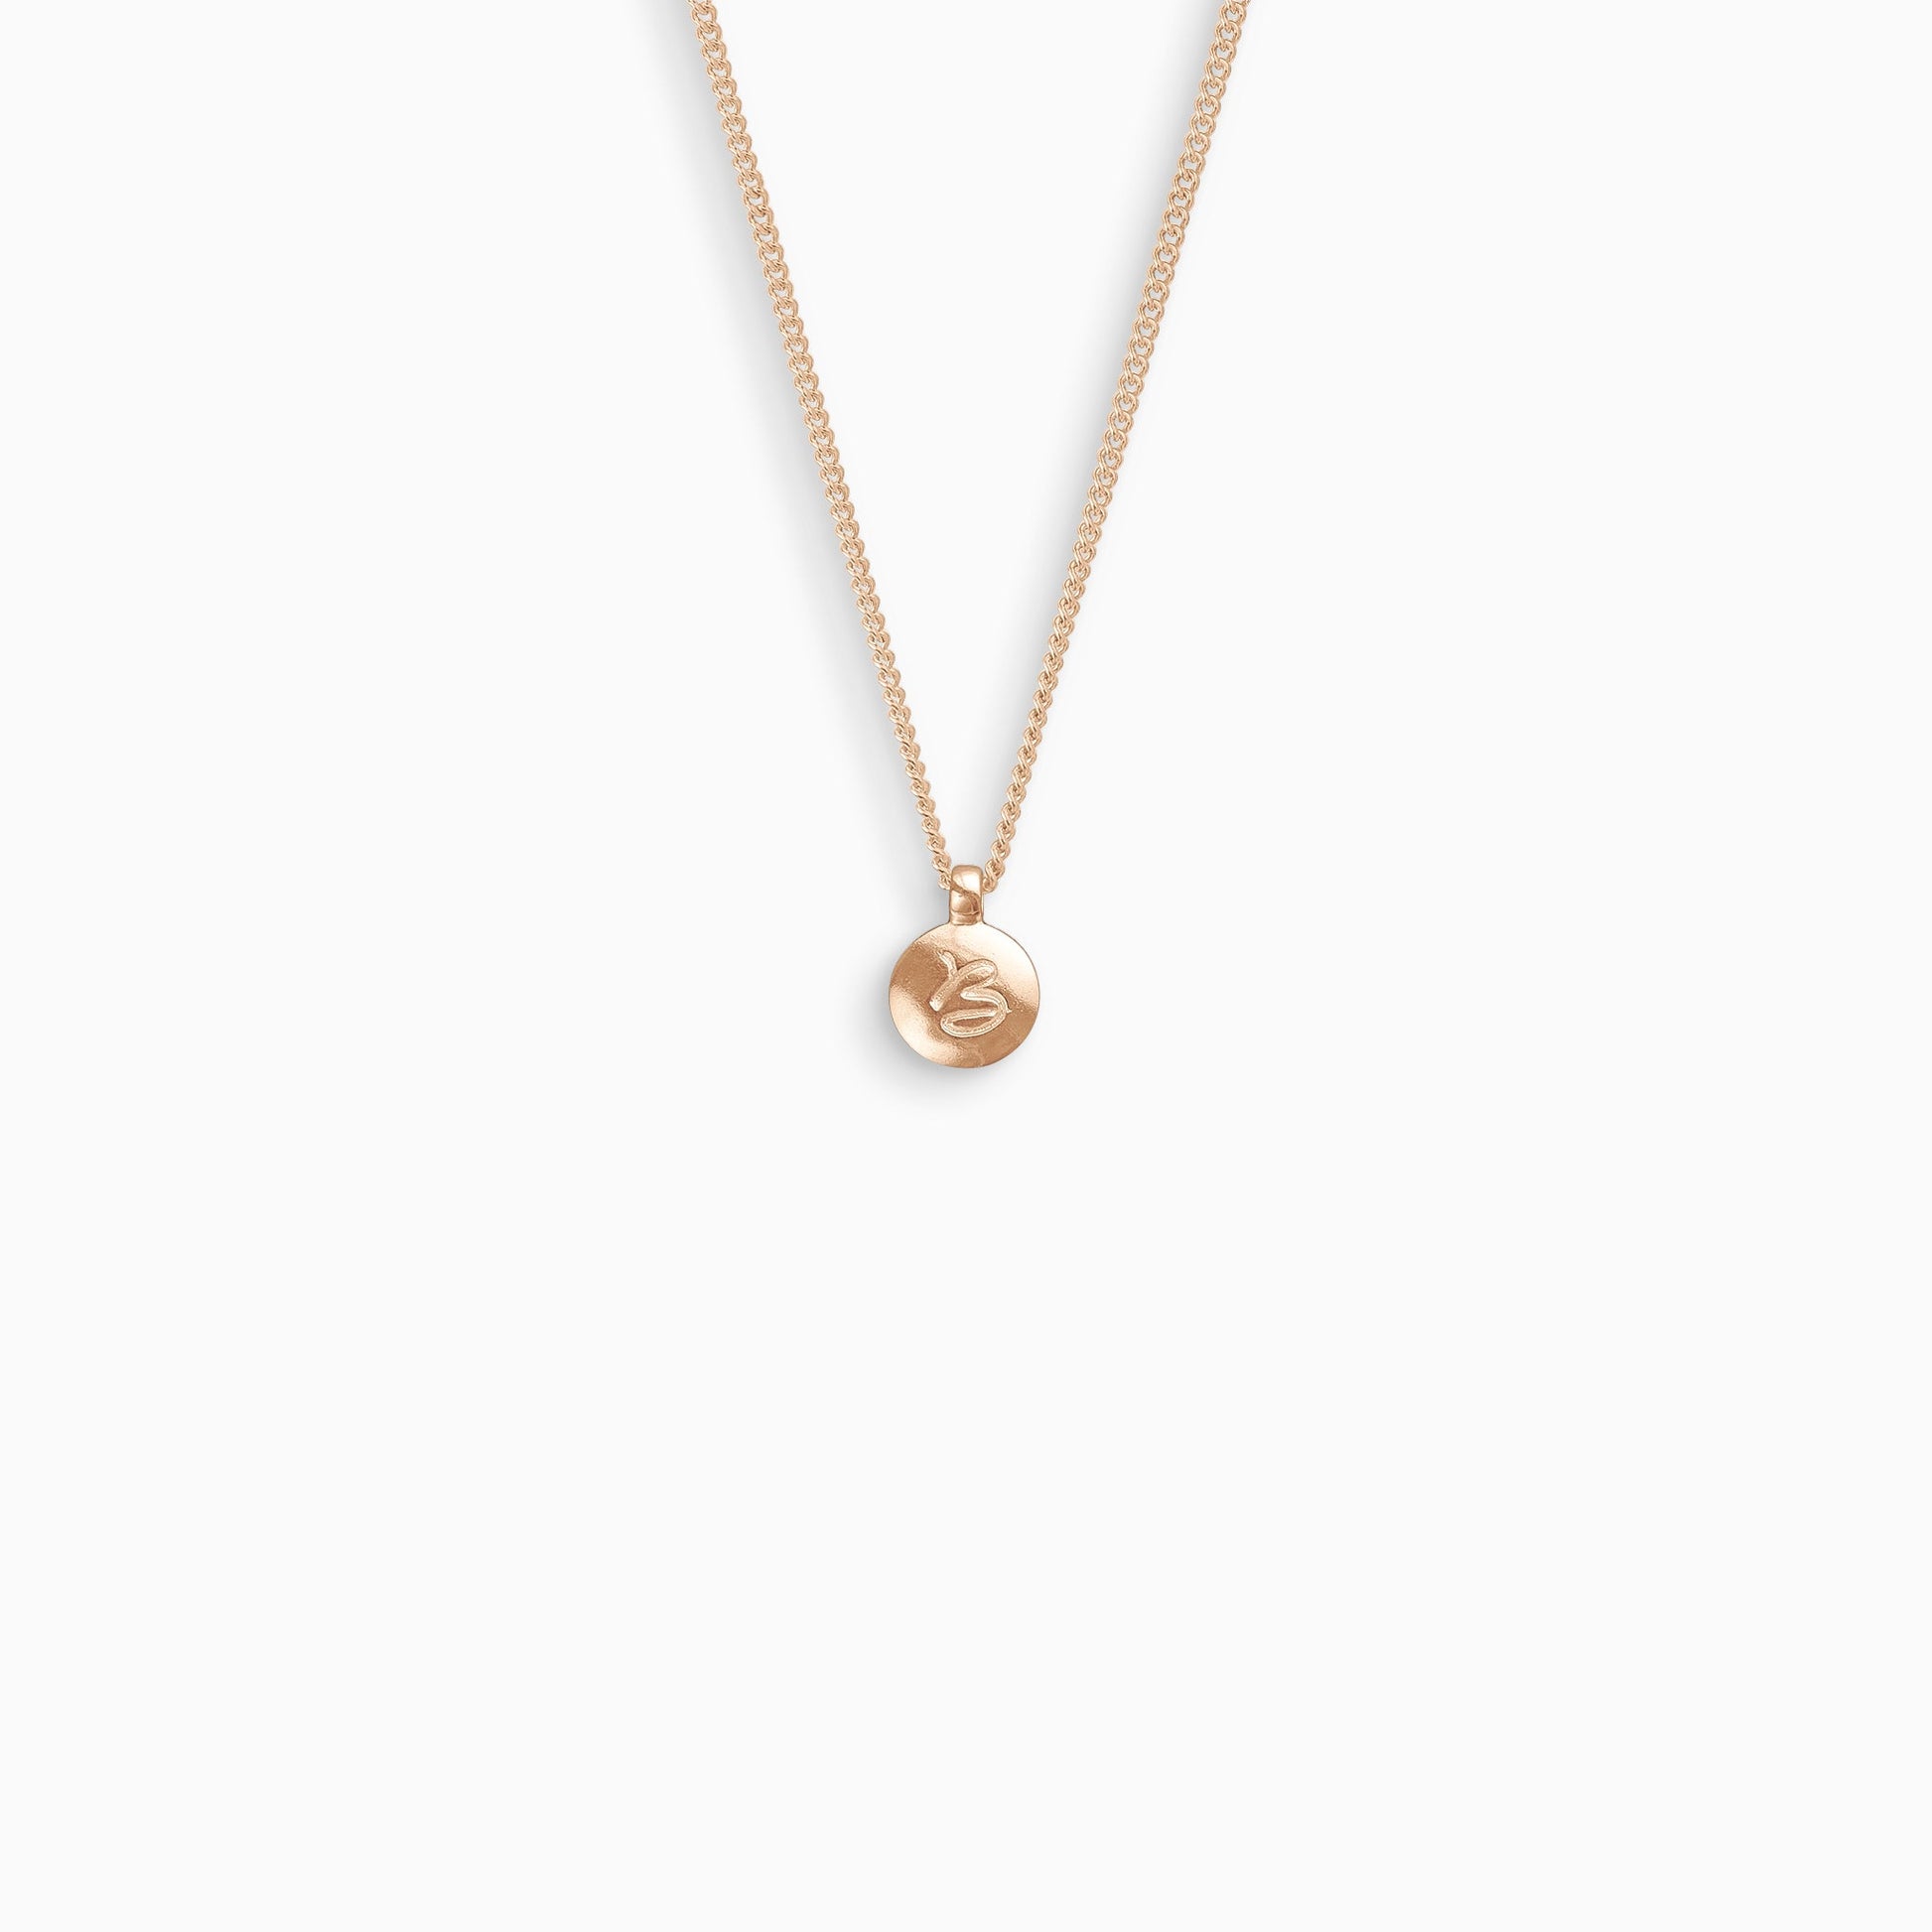 18ct Fairtrade rose gold 13mm round smooth convex pendant inscribed with a single letter of your choice from A-Z. On a 45cm curb chain.